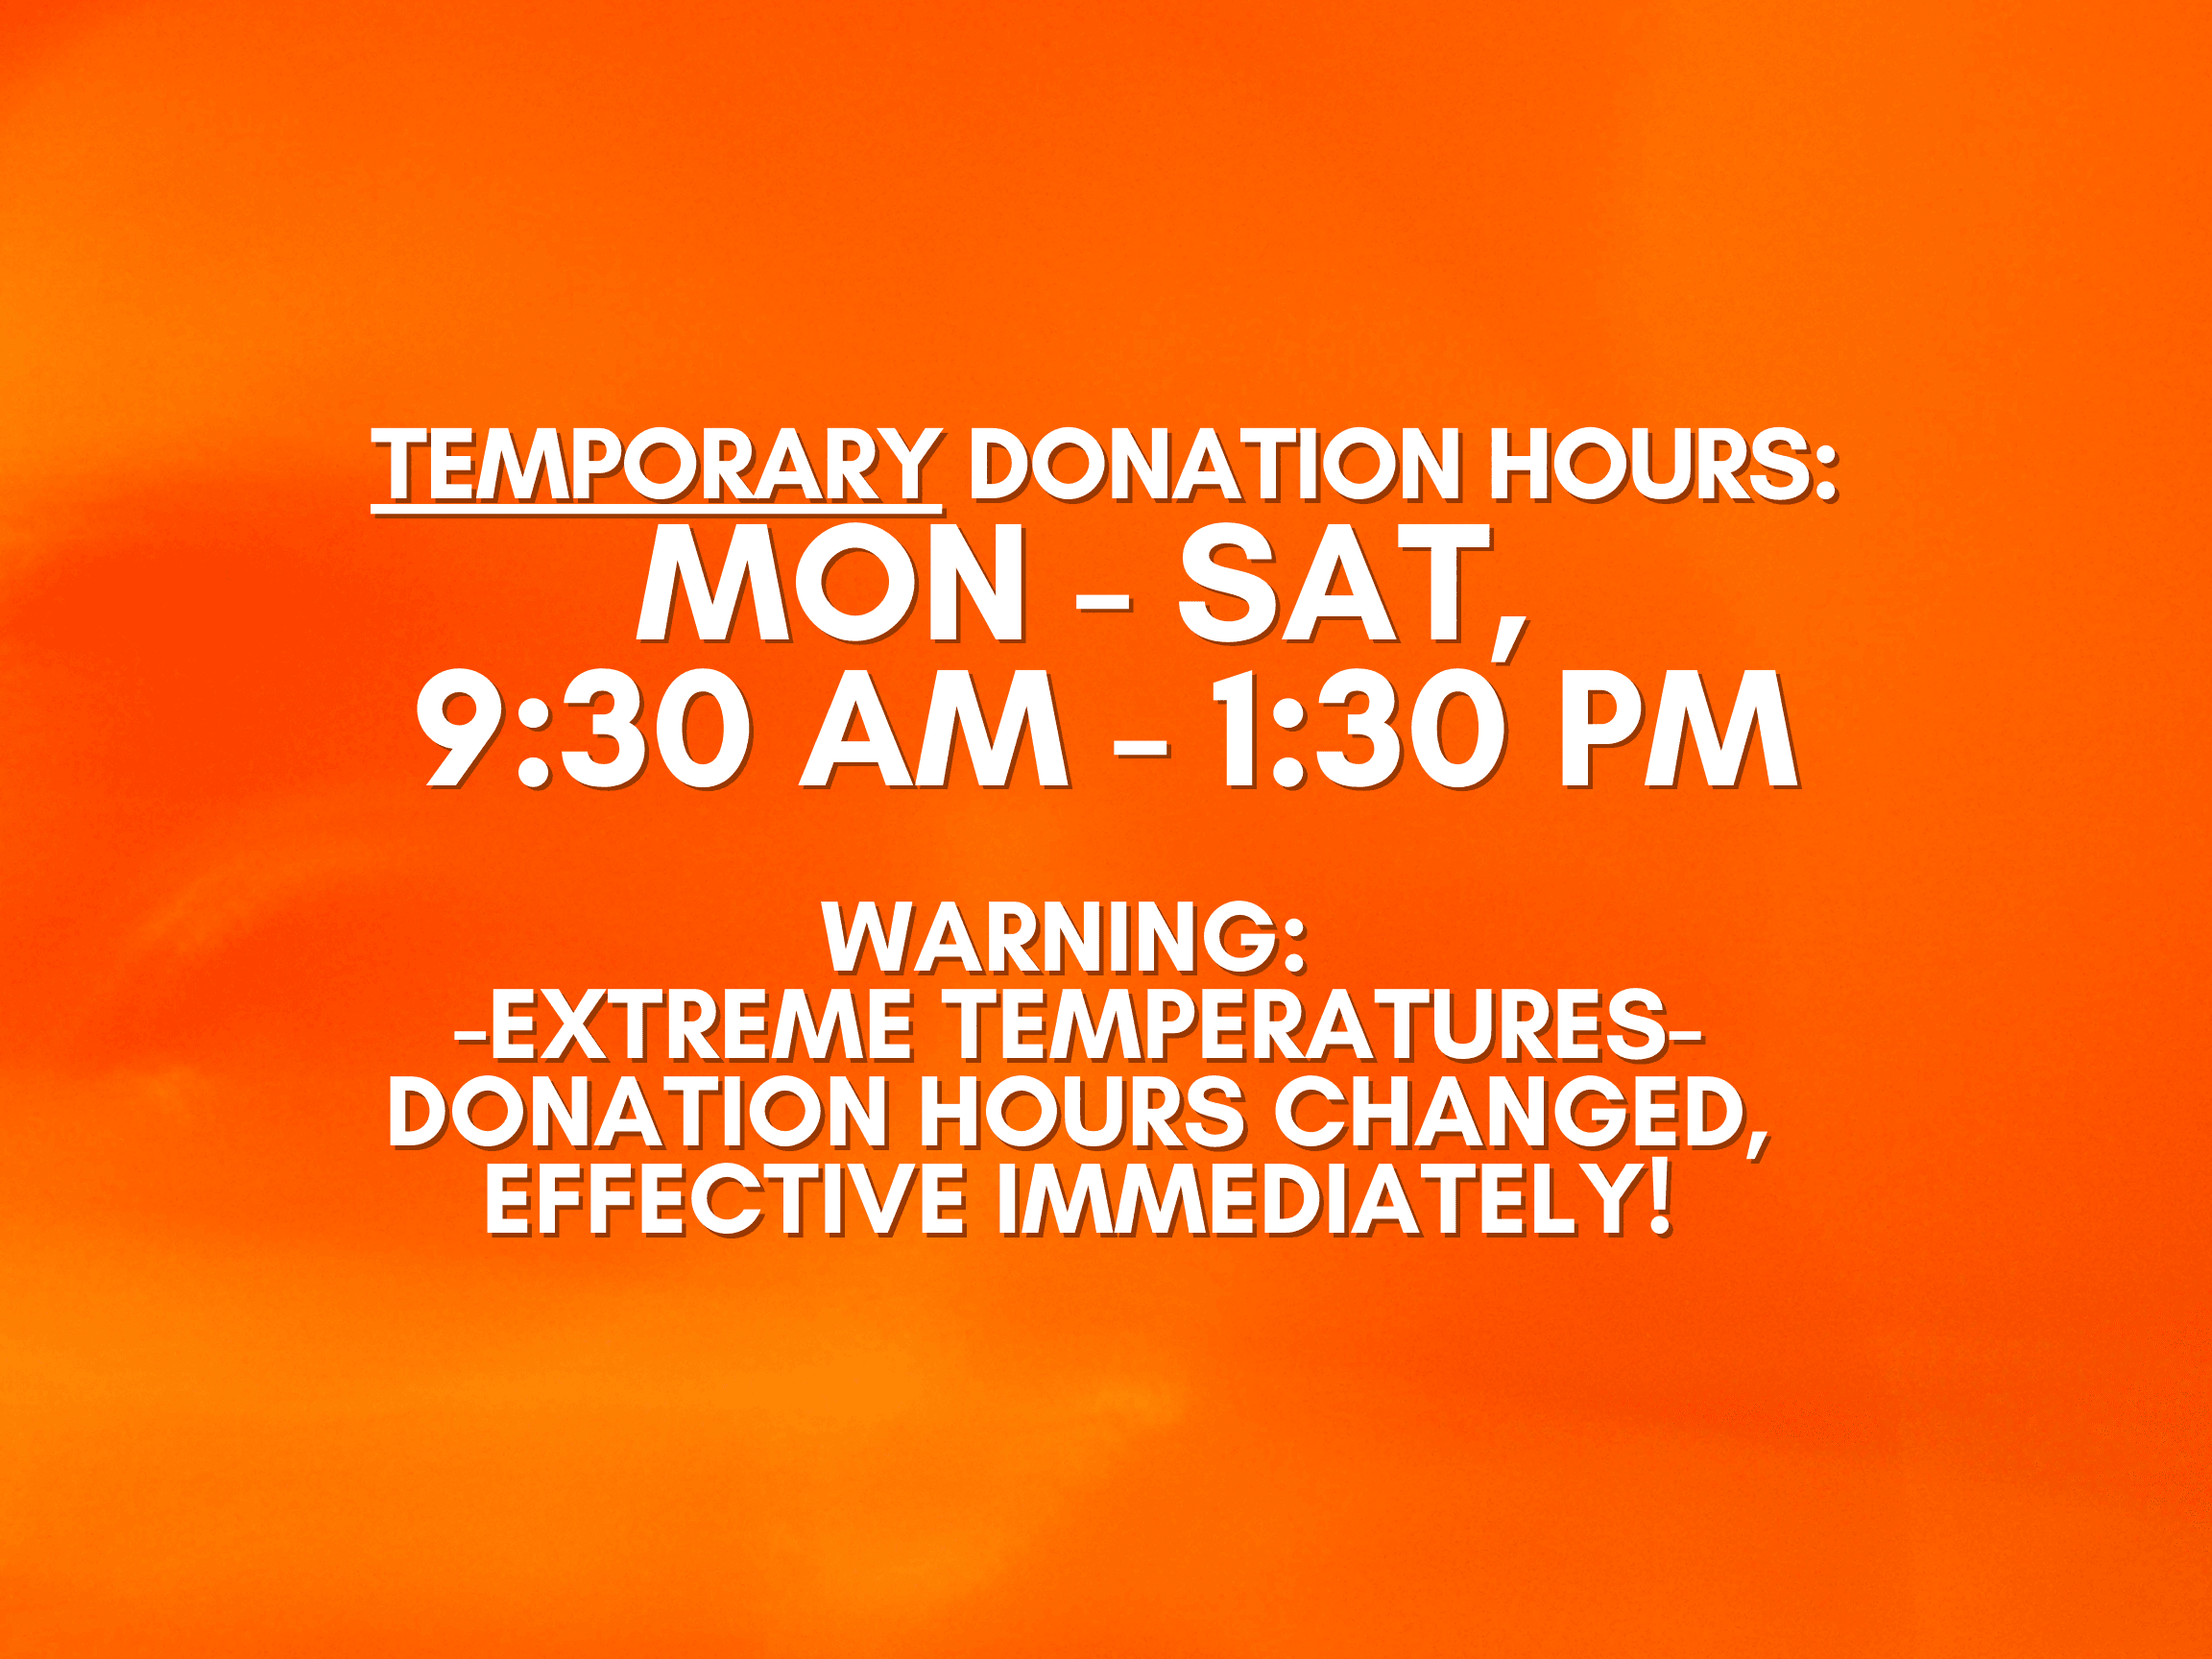 New Donation Hours Due to Heat